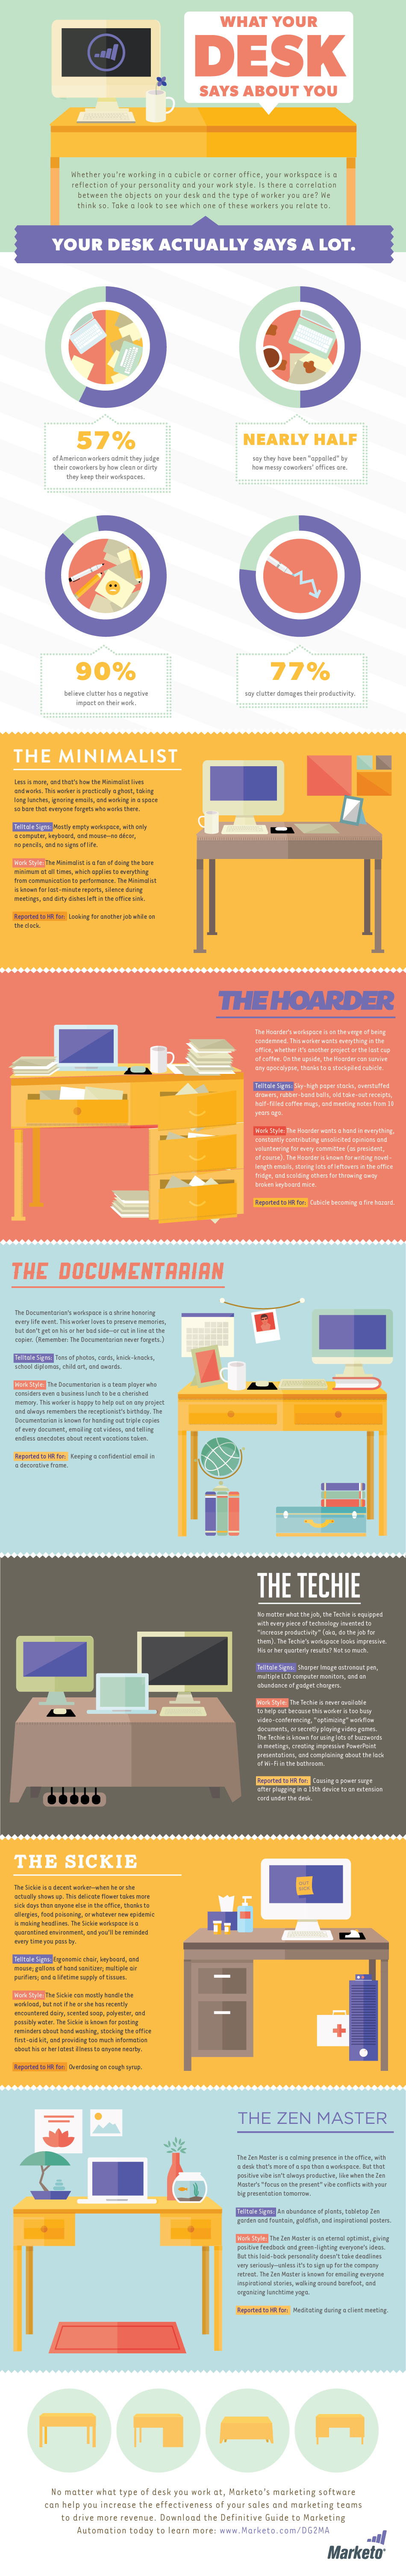 what your desk says about you